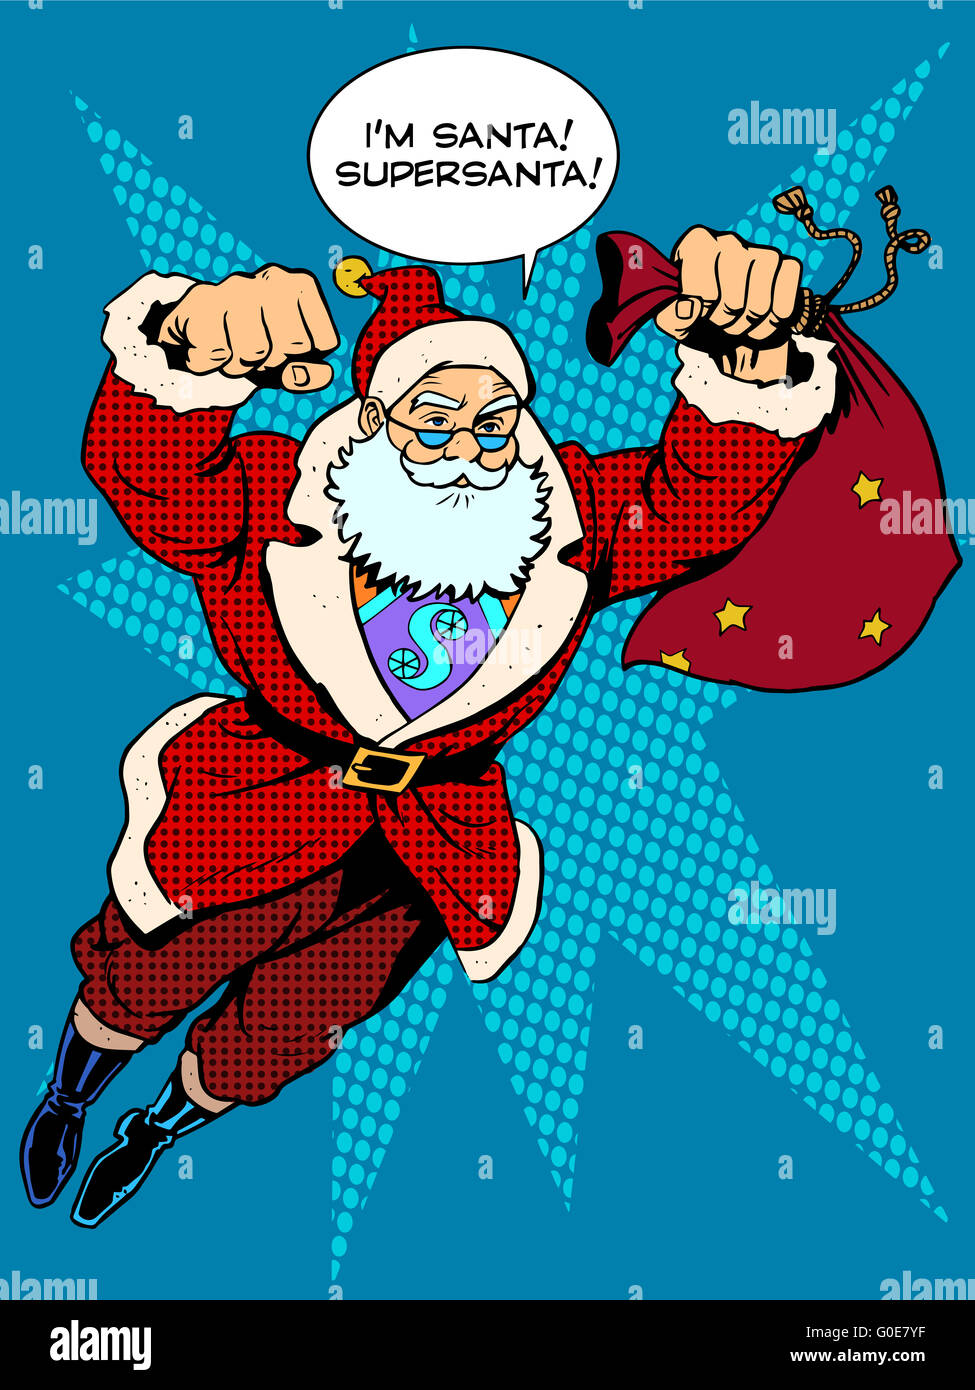 Santa Claus is flying with gifts like a superhero Stock Photo